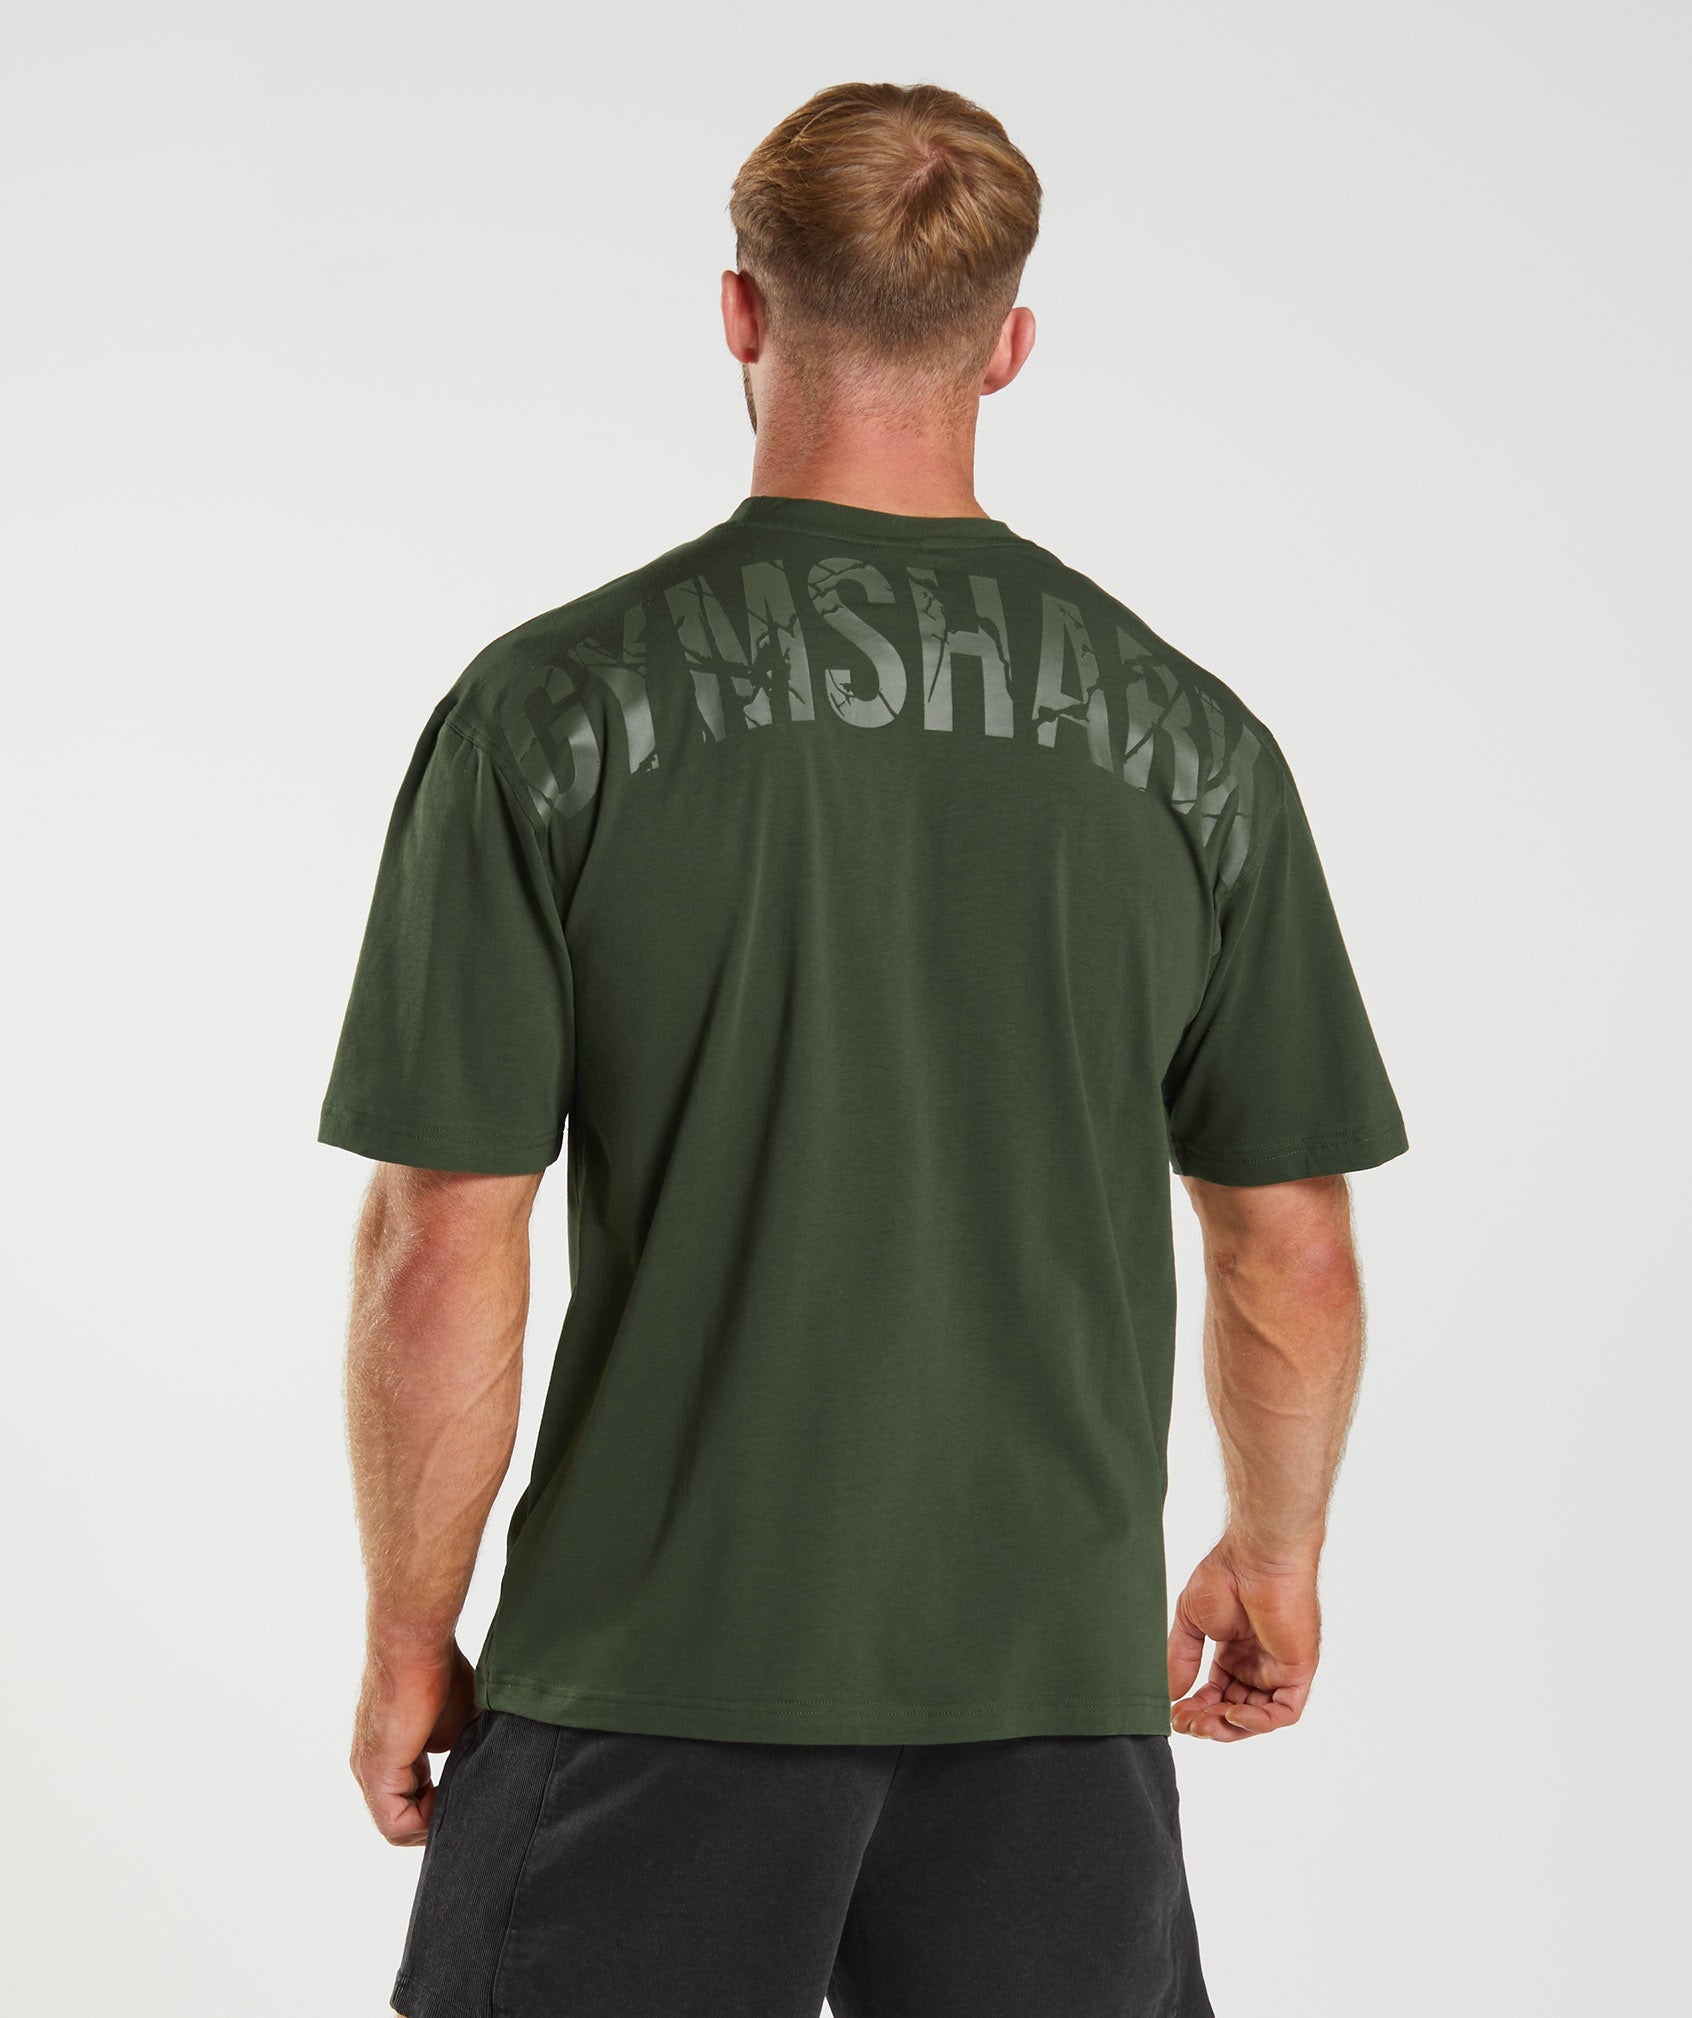 Power T-Shirt in Moss Olive - view 2